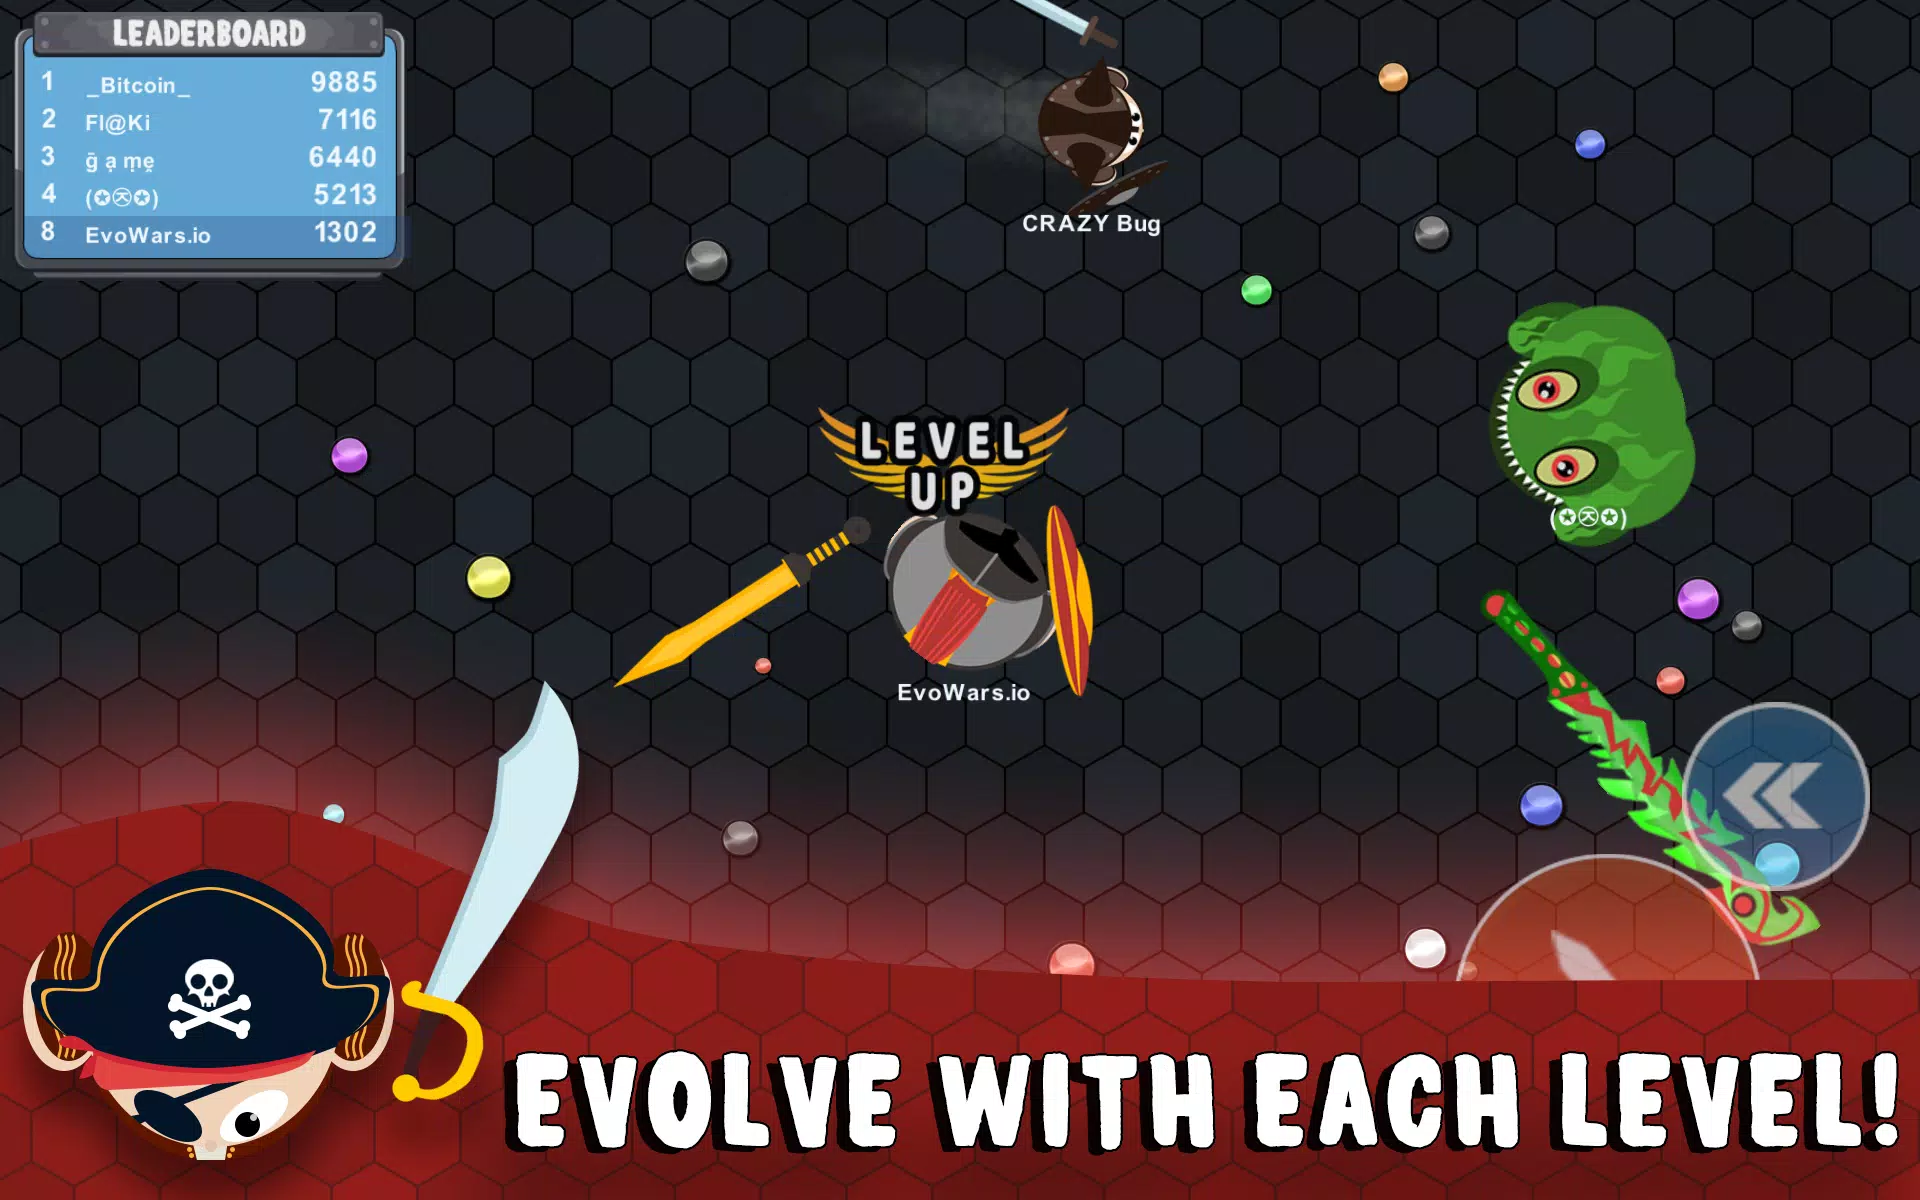 Download Evowars.io MOD APK 1.7.8 (Immortal, Level, One Hit) for Android iOS